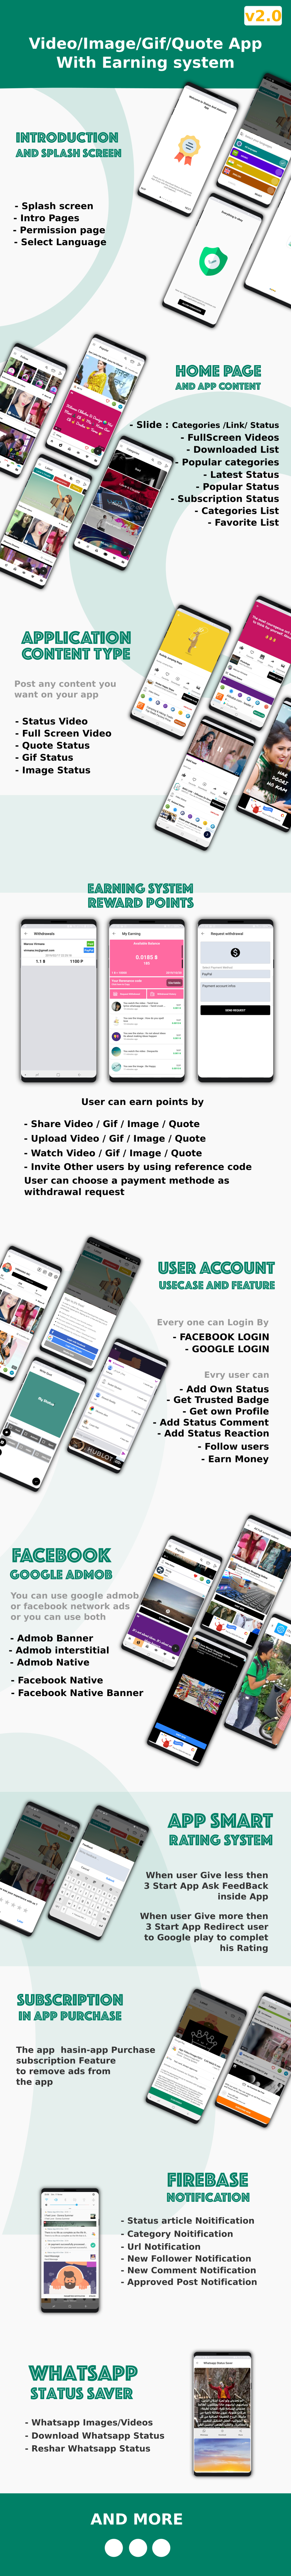 Video/Image/Gif/Quote App With Earning system (Reward points) - 4